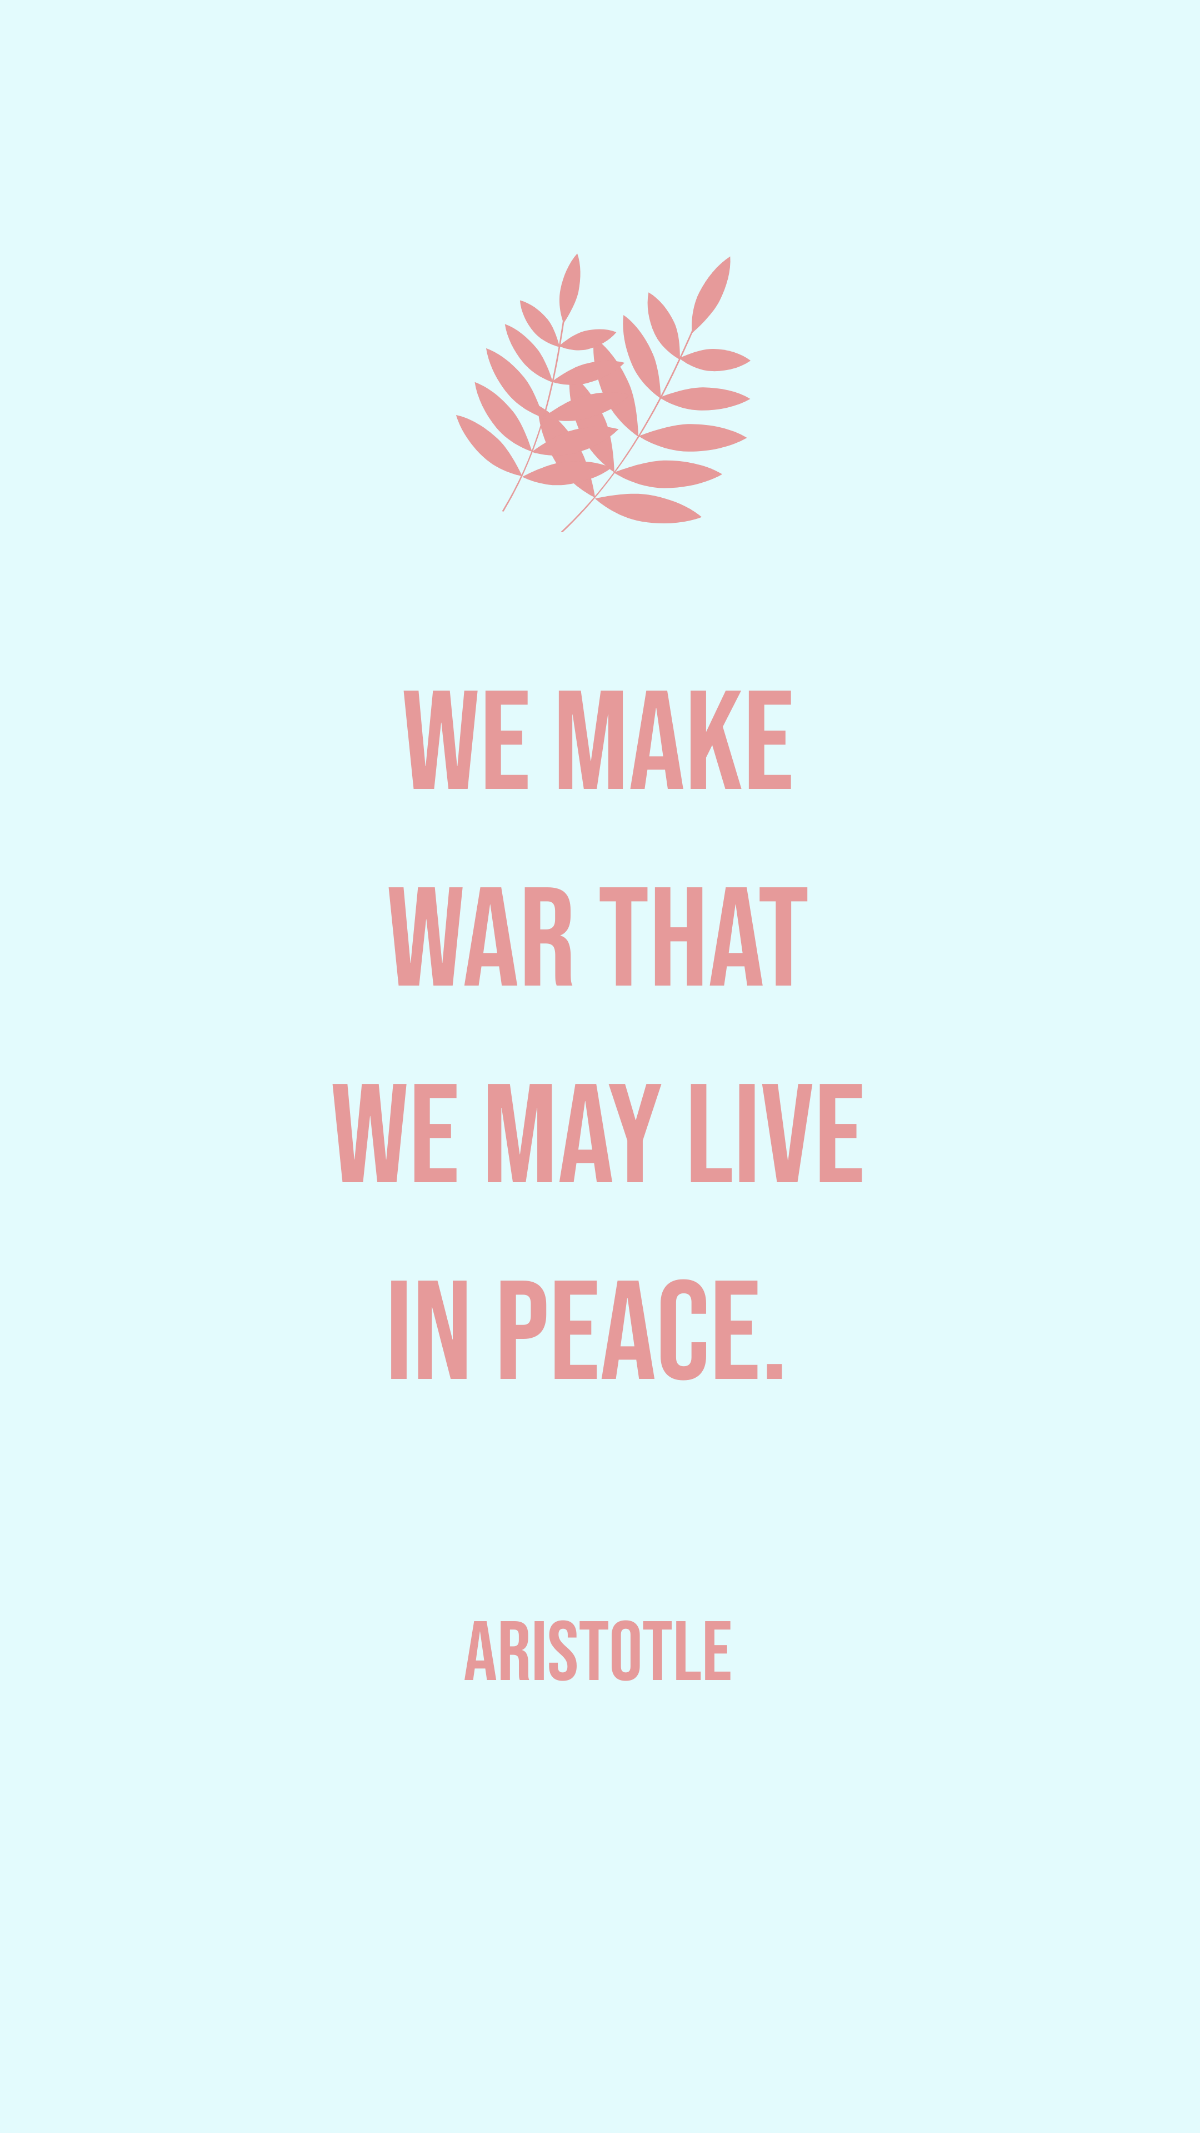 Aristotle - We make war that we may live in peace. Template